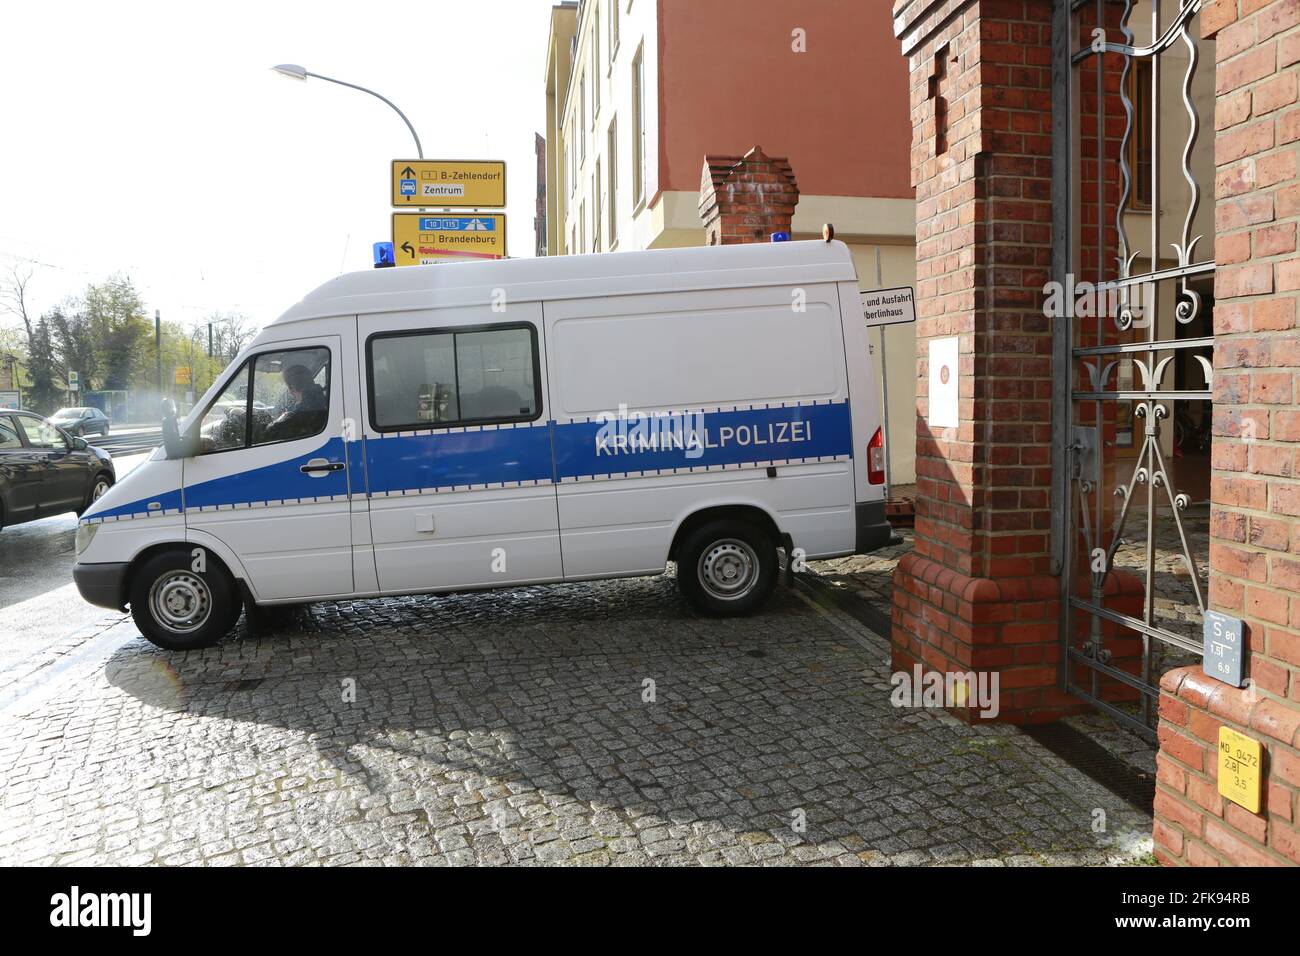 04/29/2021, Potsdam, Germany,. Criminal Police Transporter.. Four dead were discovered in the 'Oberlin-Lebenswelten' care facility in Potsdam for people with disabilities. An urgently suspect 51-year-old woman was arrested. The victims have stab wounds. Stock Photo